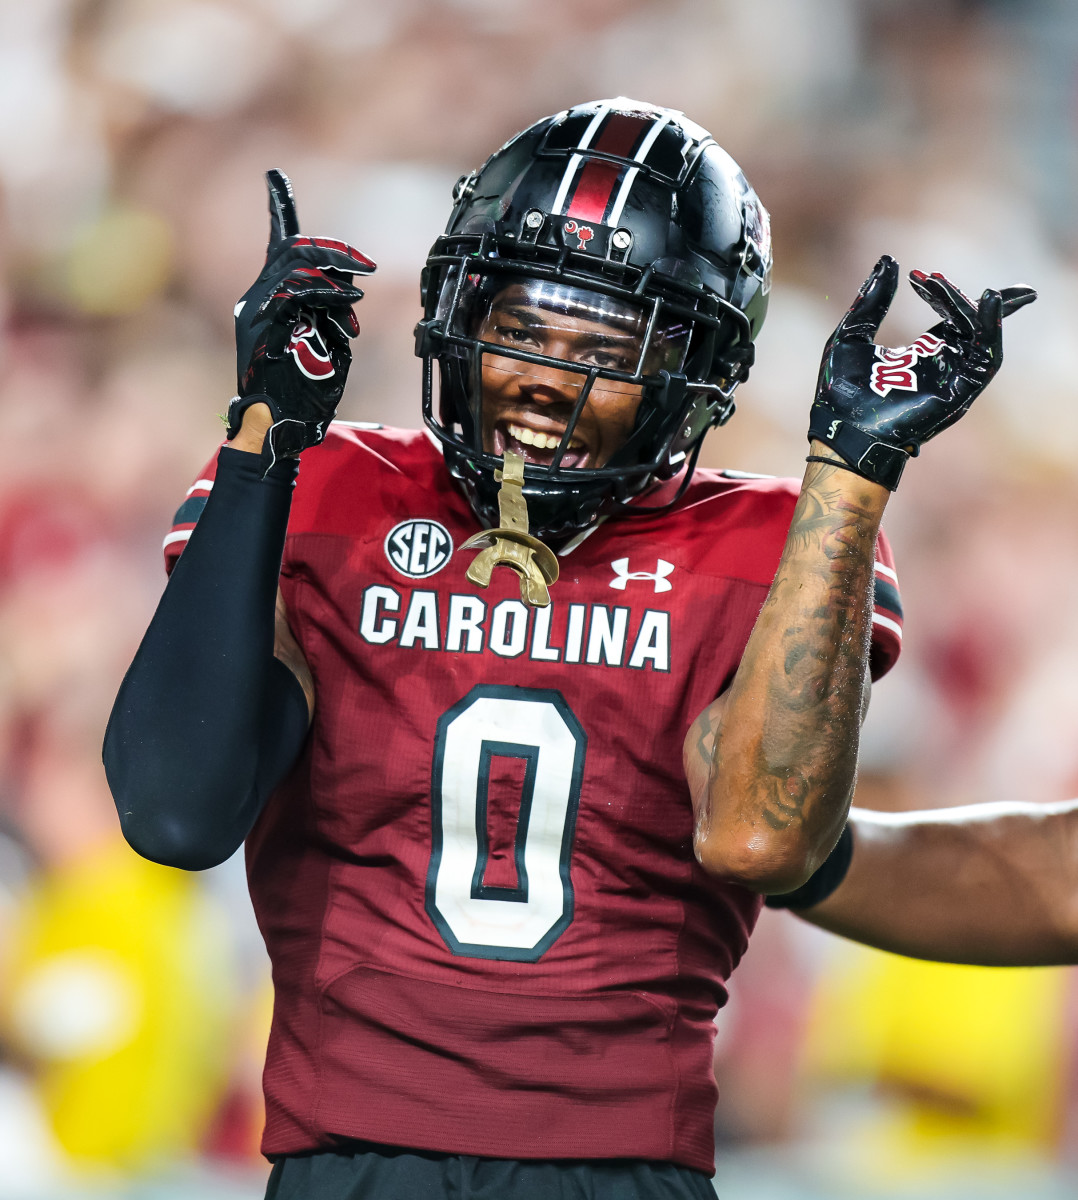 Sep 3, 2022; Columbia, South Carolina, USA; South Carolina Gamecocks tight end Jaheim Bell (0) celebrates making a two-point conversion against the Georgia State Panthers in the second half at Williams-Brice Stadium. Credit: Jeff Blake-USA TODAY Sports